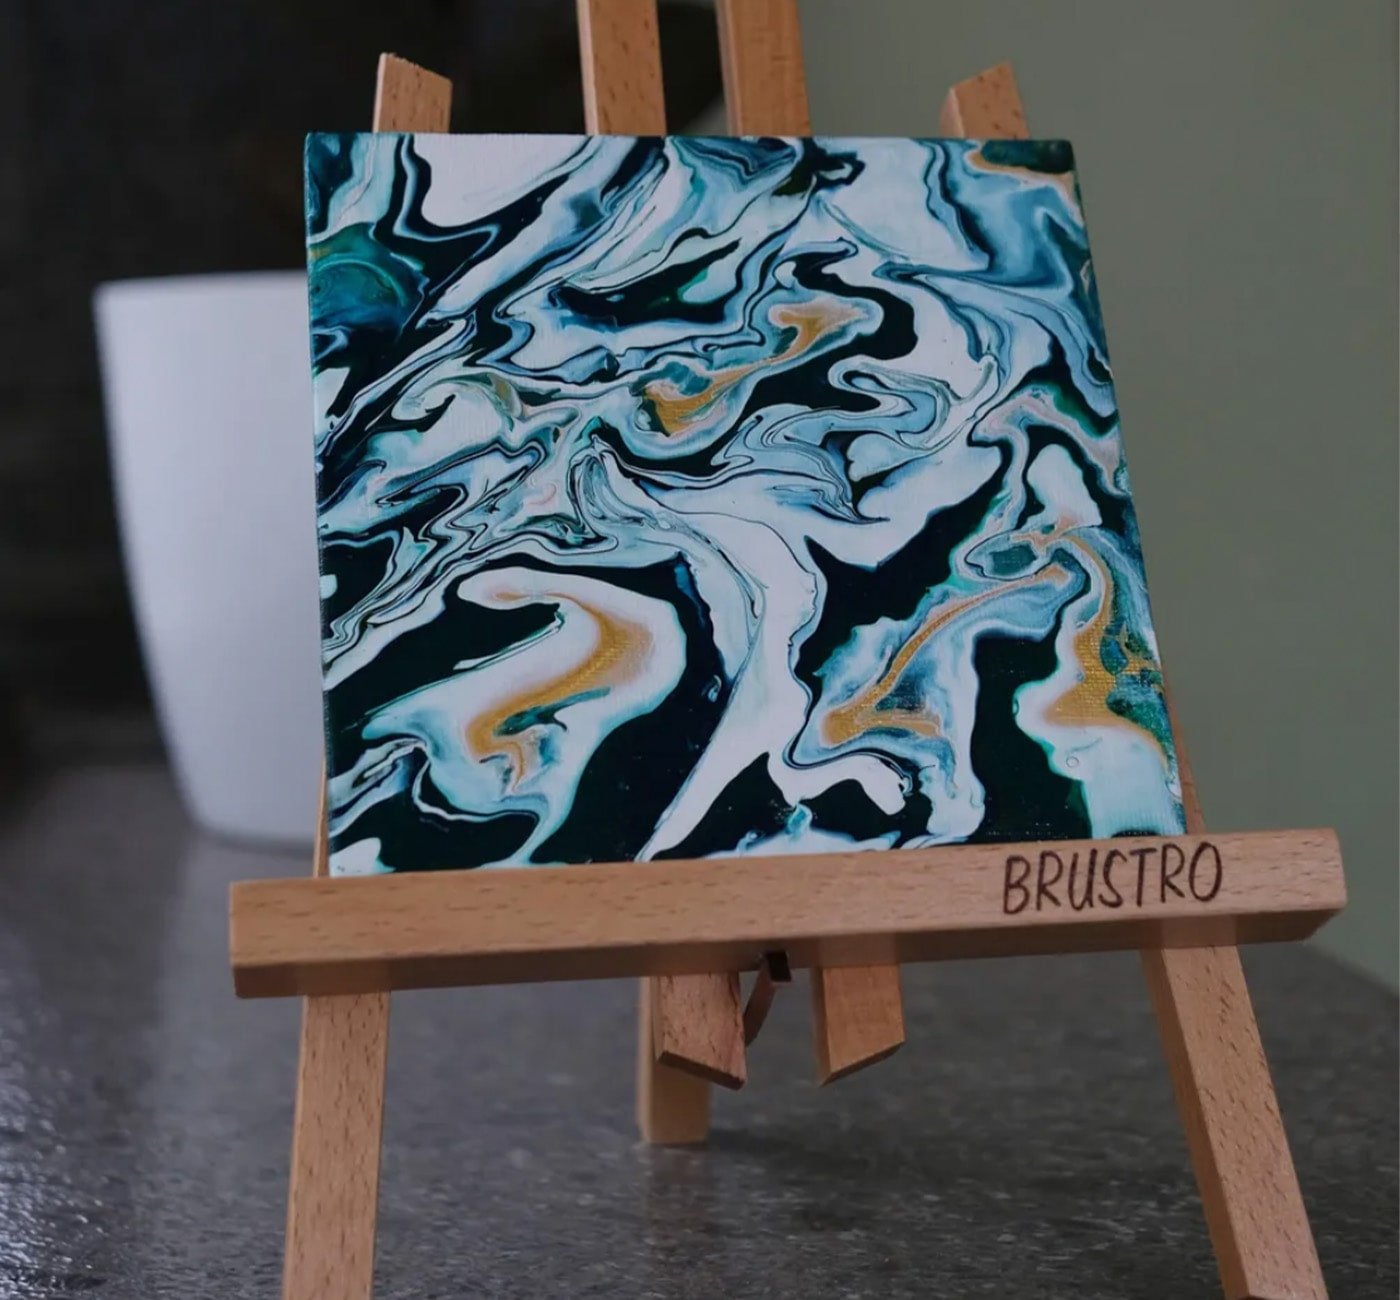 Finished fluid painting in black, white, gold , and teal paint mounted on a small easel.  Fluid painting looks like marble it's just a bunch of swirls of painting covering the whole painting fluidly.